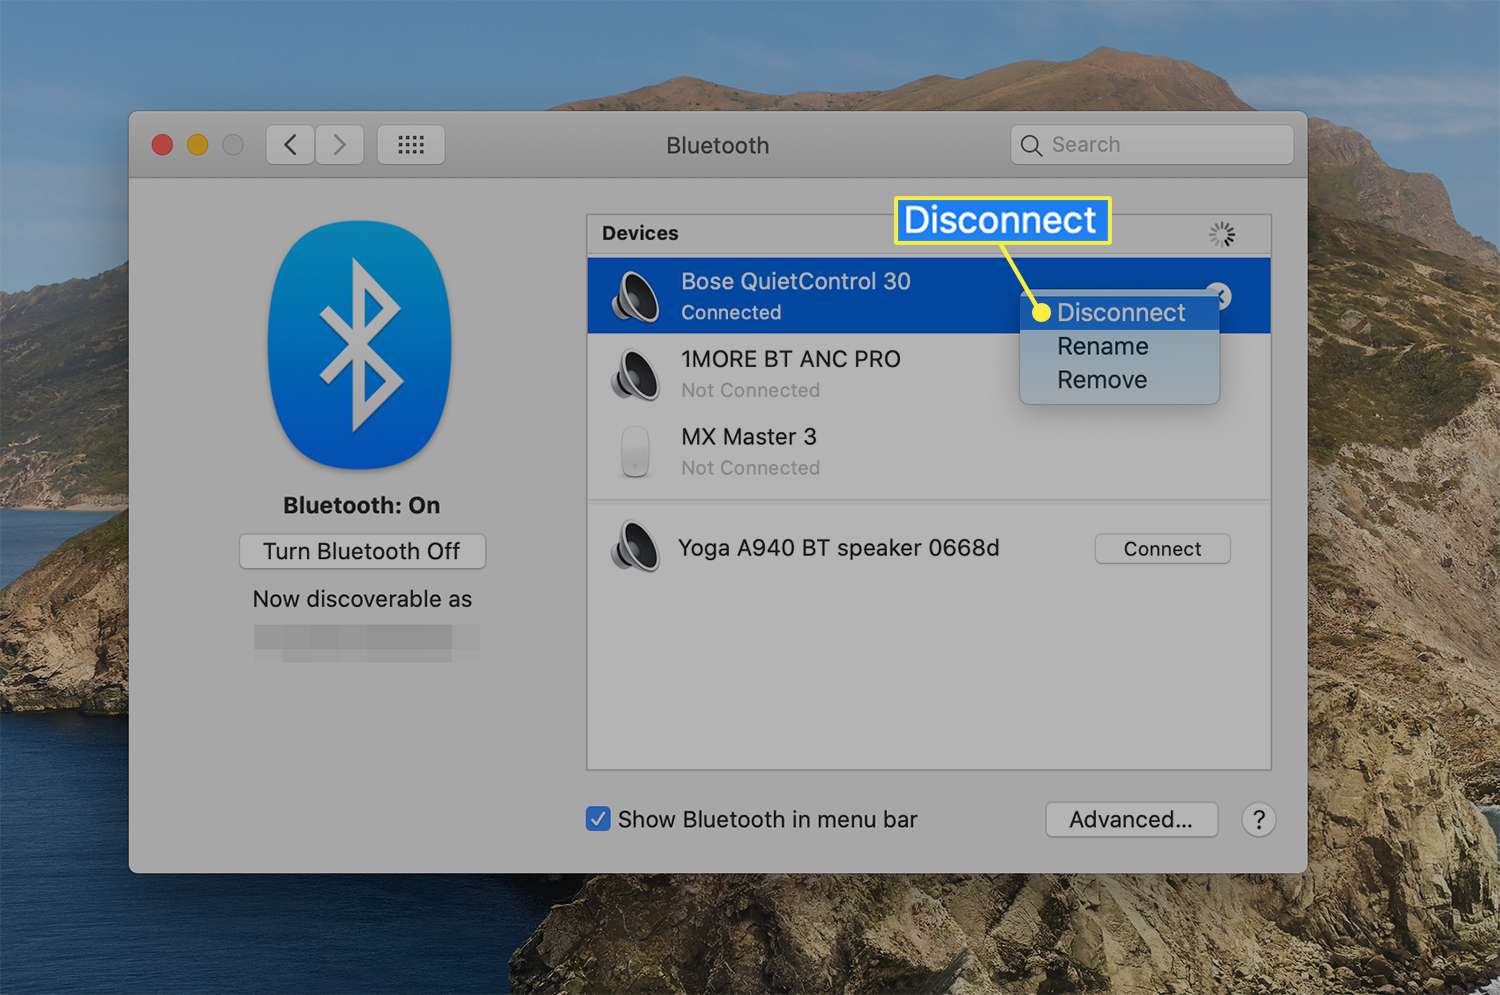 Disconnect option from a connected Bluetooth device on macOS